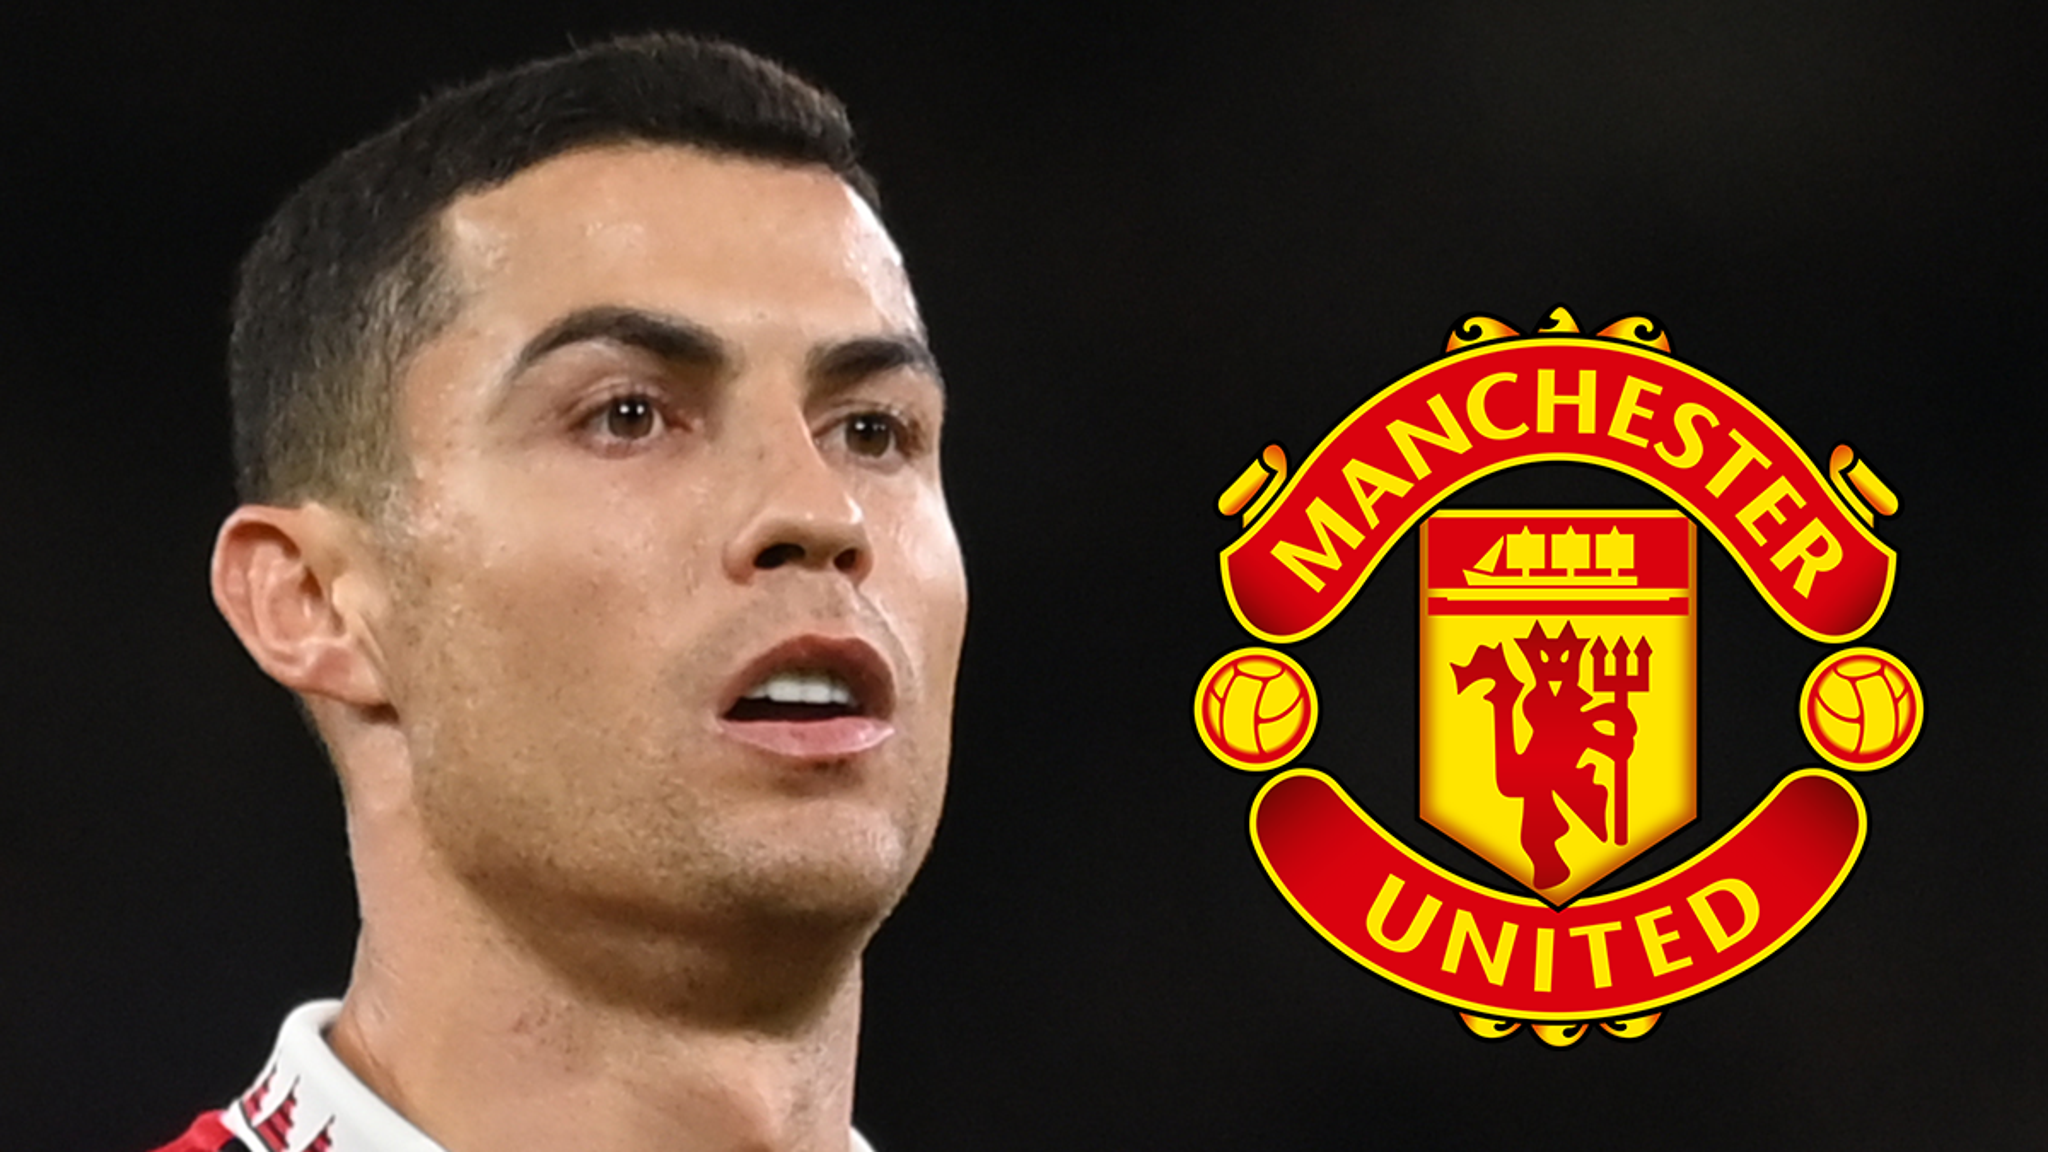 Cristiano Ronaldo Out At Manchester United Immediately, Mutual Decision